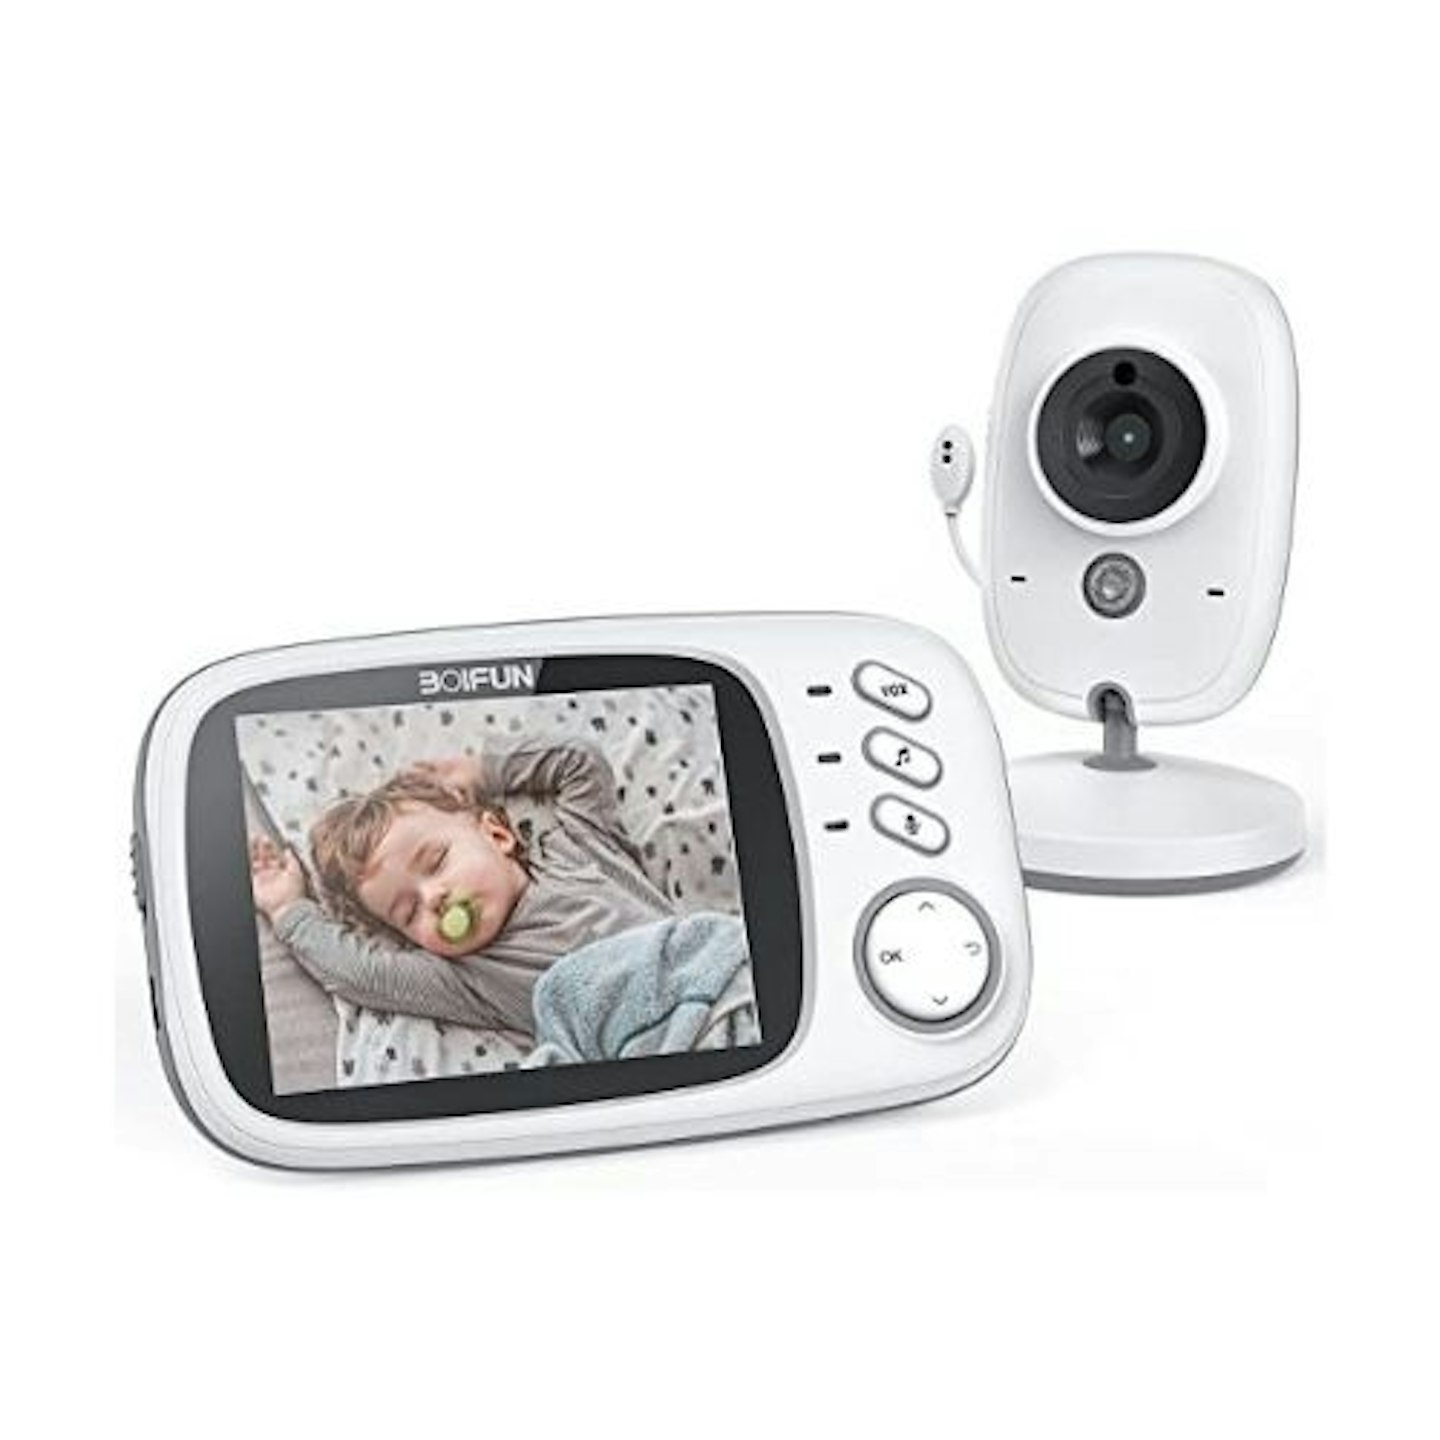 Best cheap baby monitors - Baby Monitor, Wireless Video Baby Monitor with Camera, 3.2